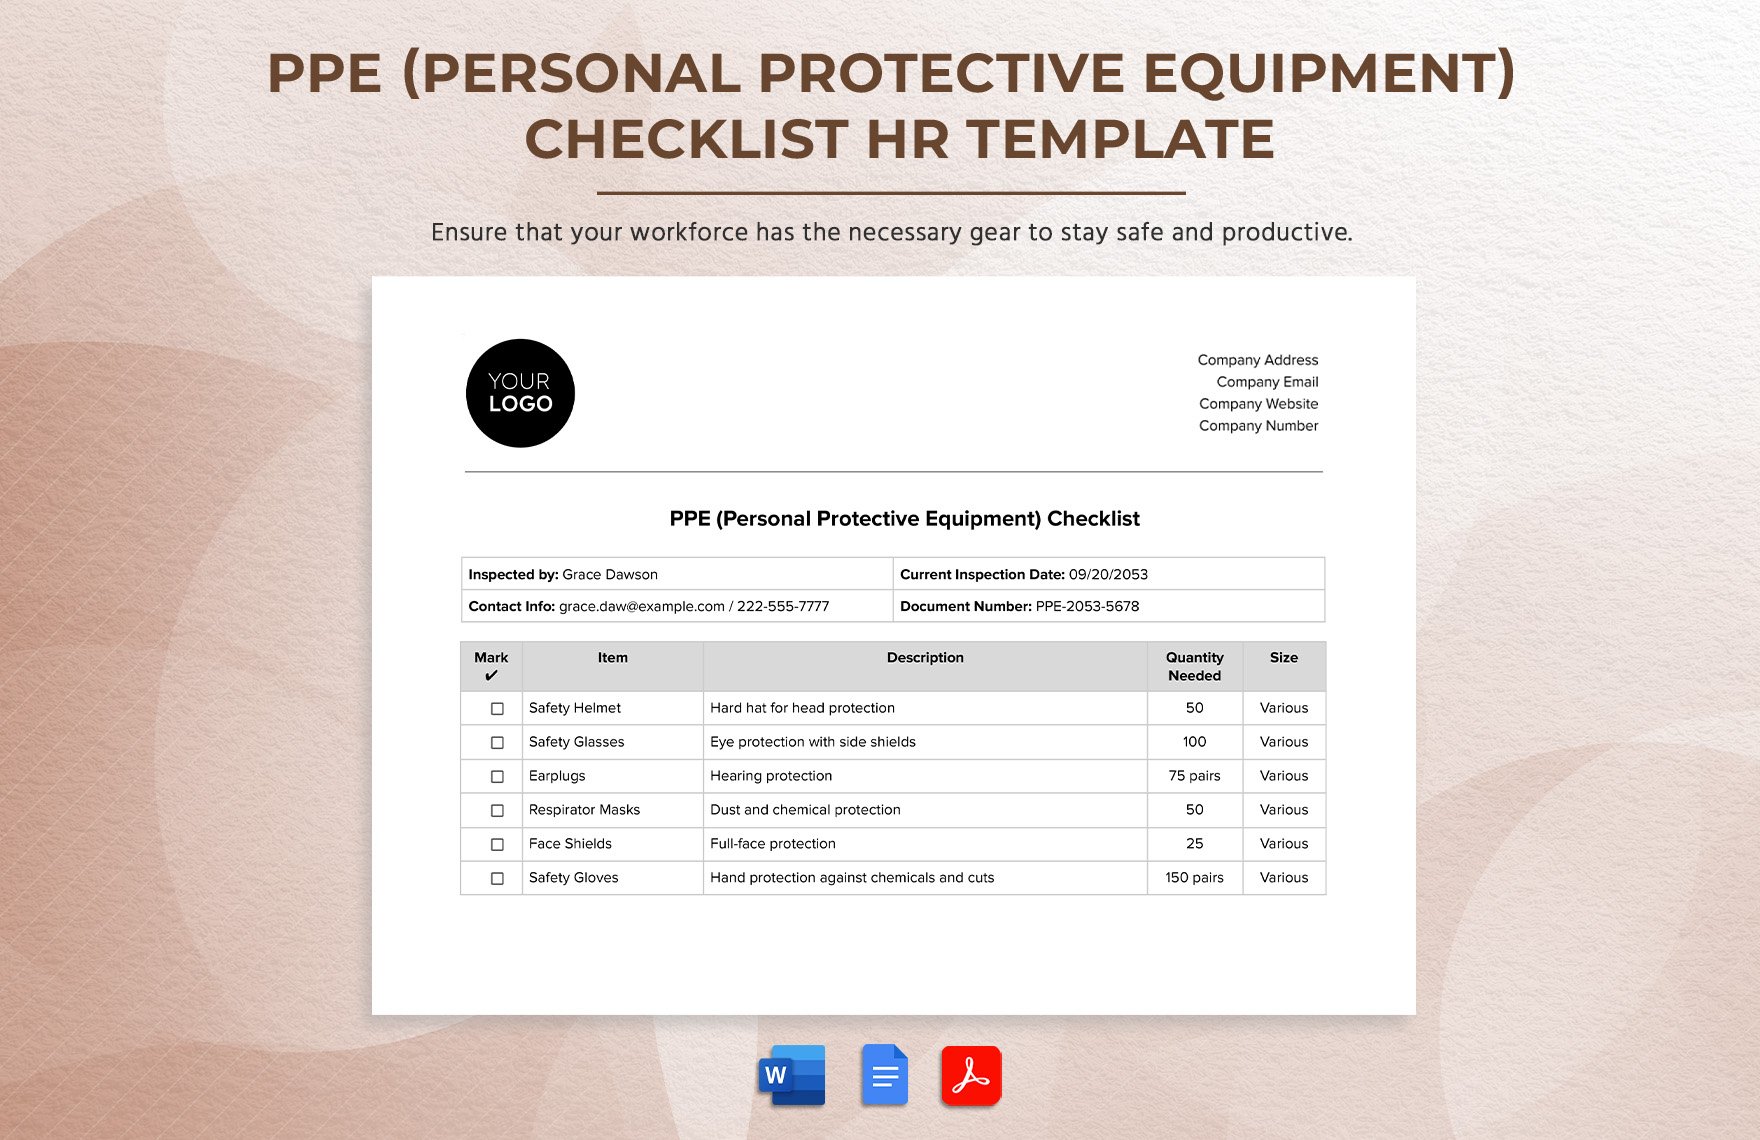 PPE (Personal Protective Equipment) Checklist HR Template